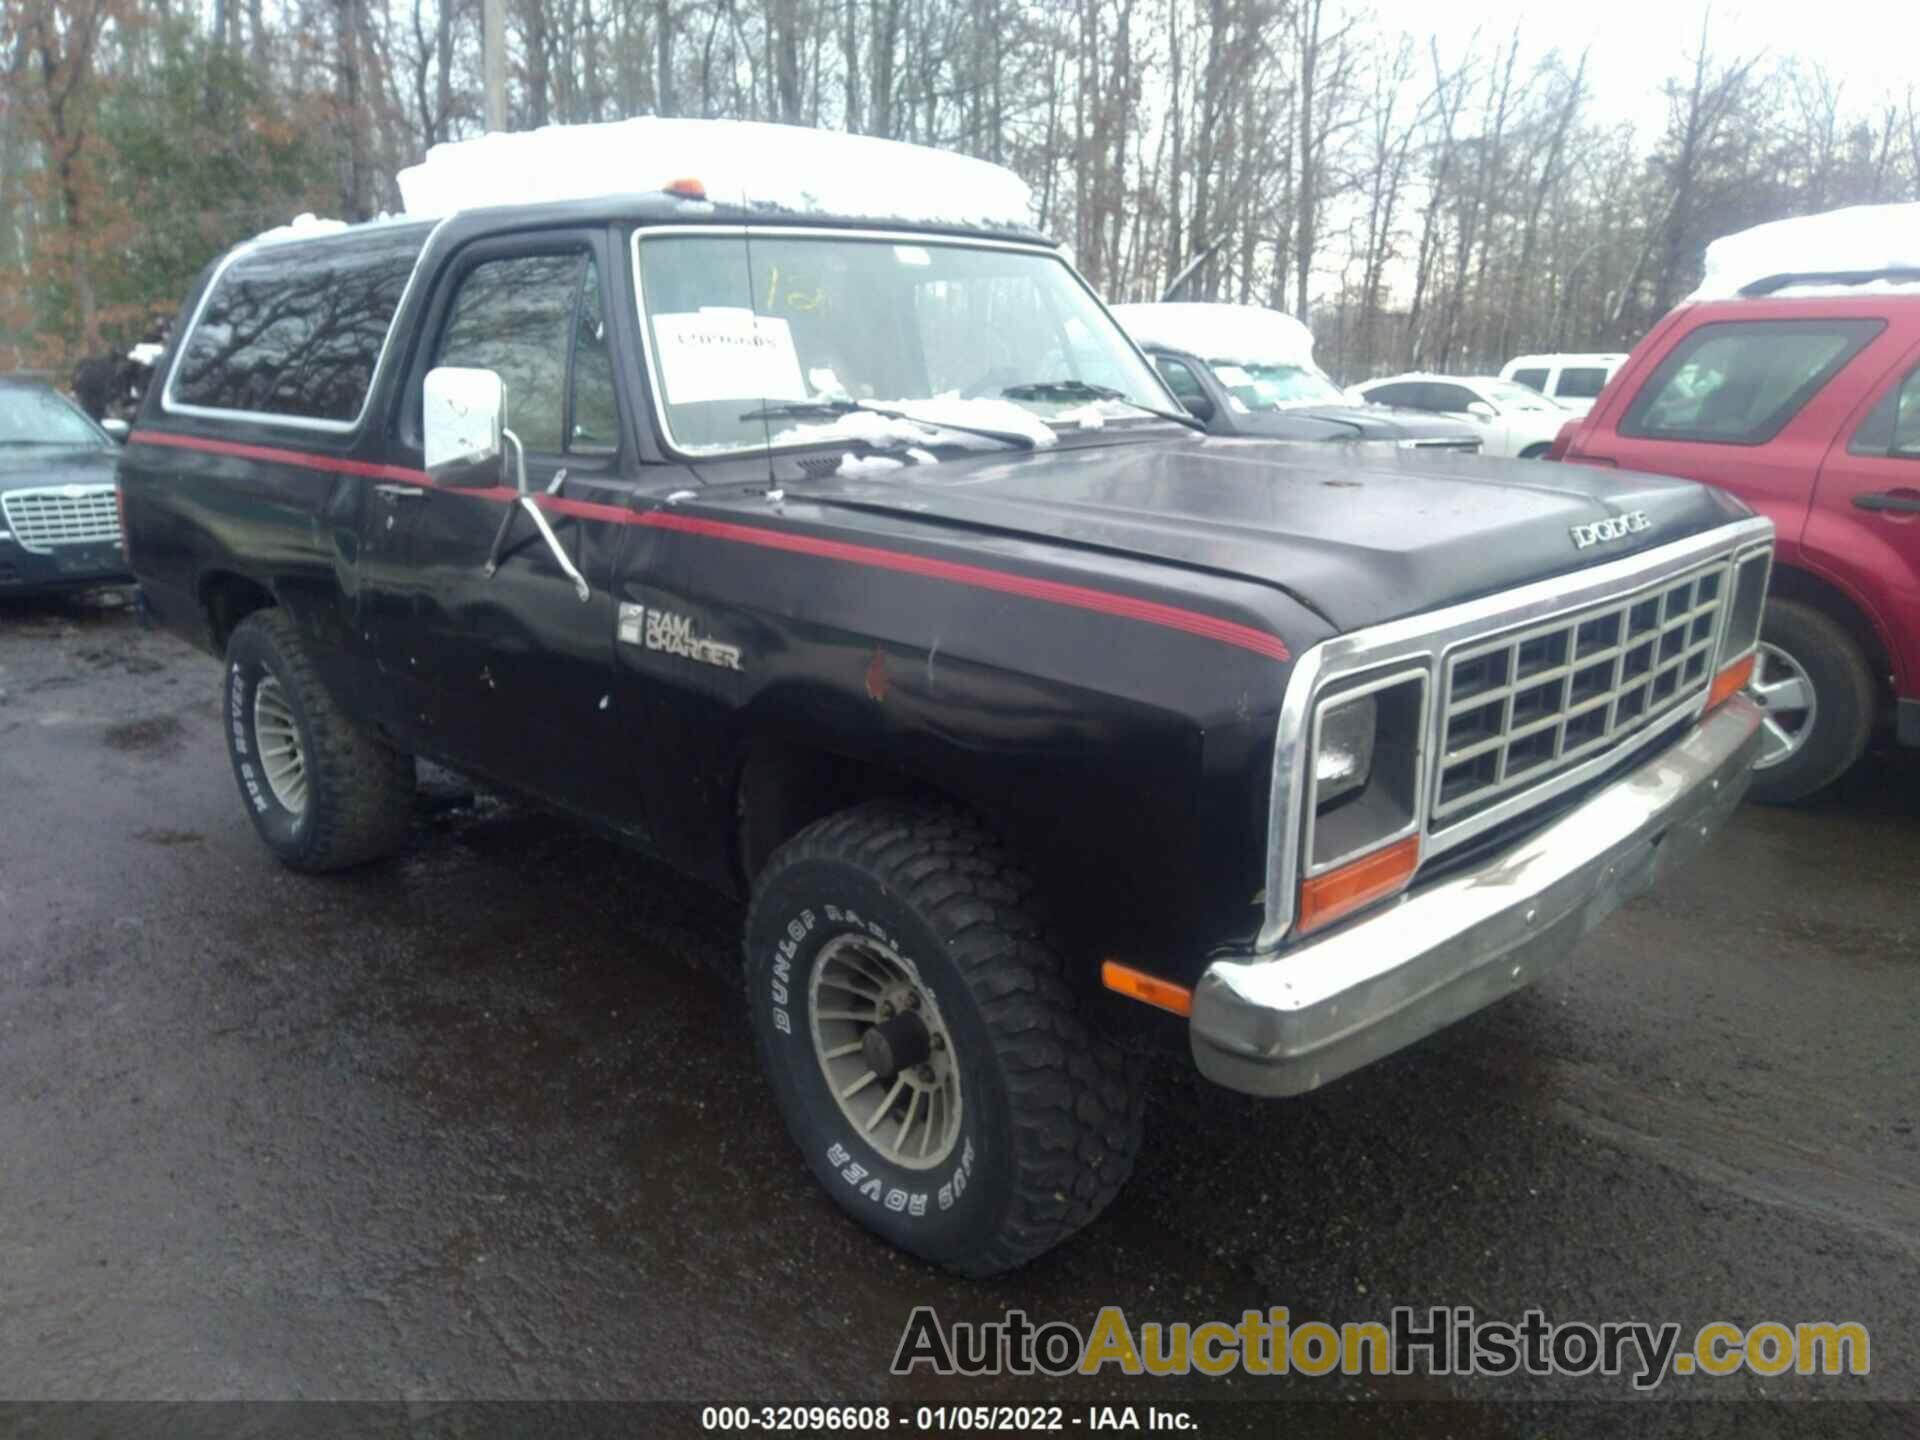 DODGE RAMCHARGER AW-100, 1B4GW12T4FS640250